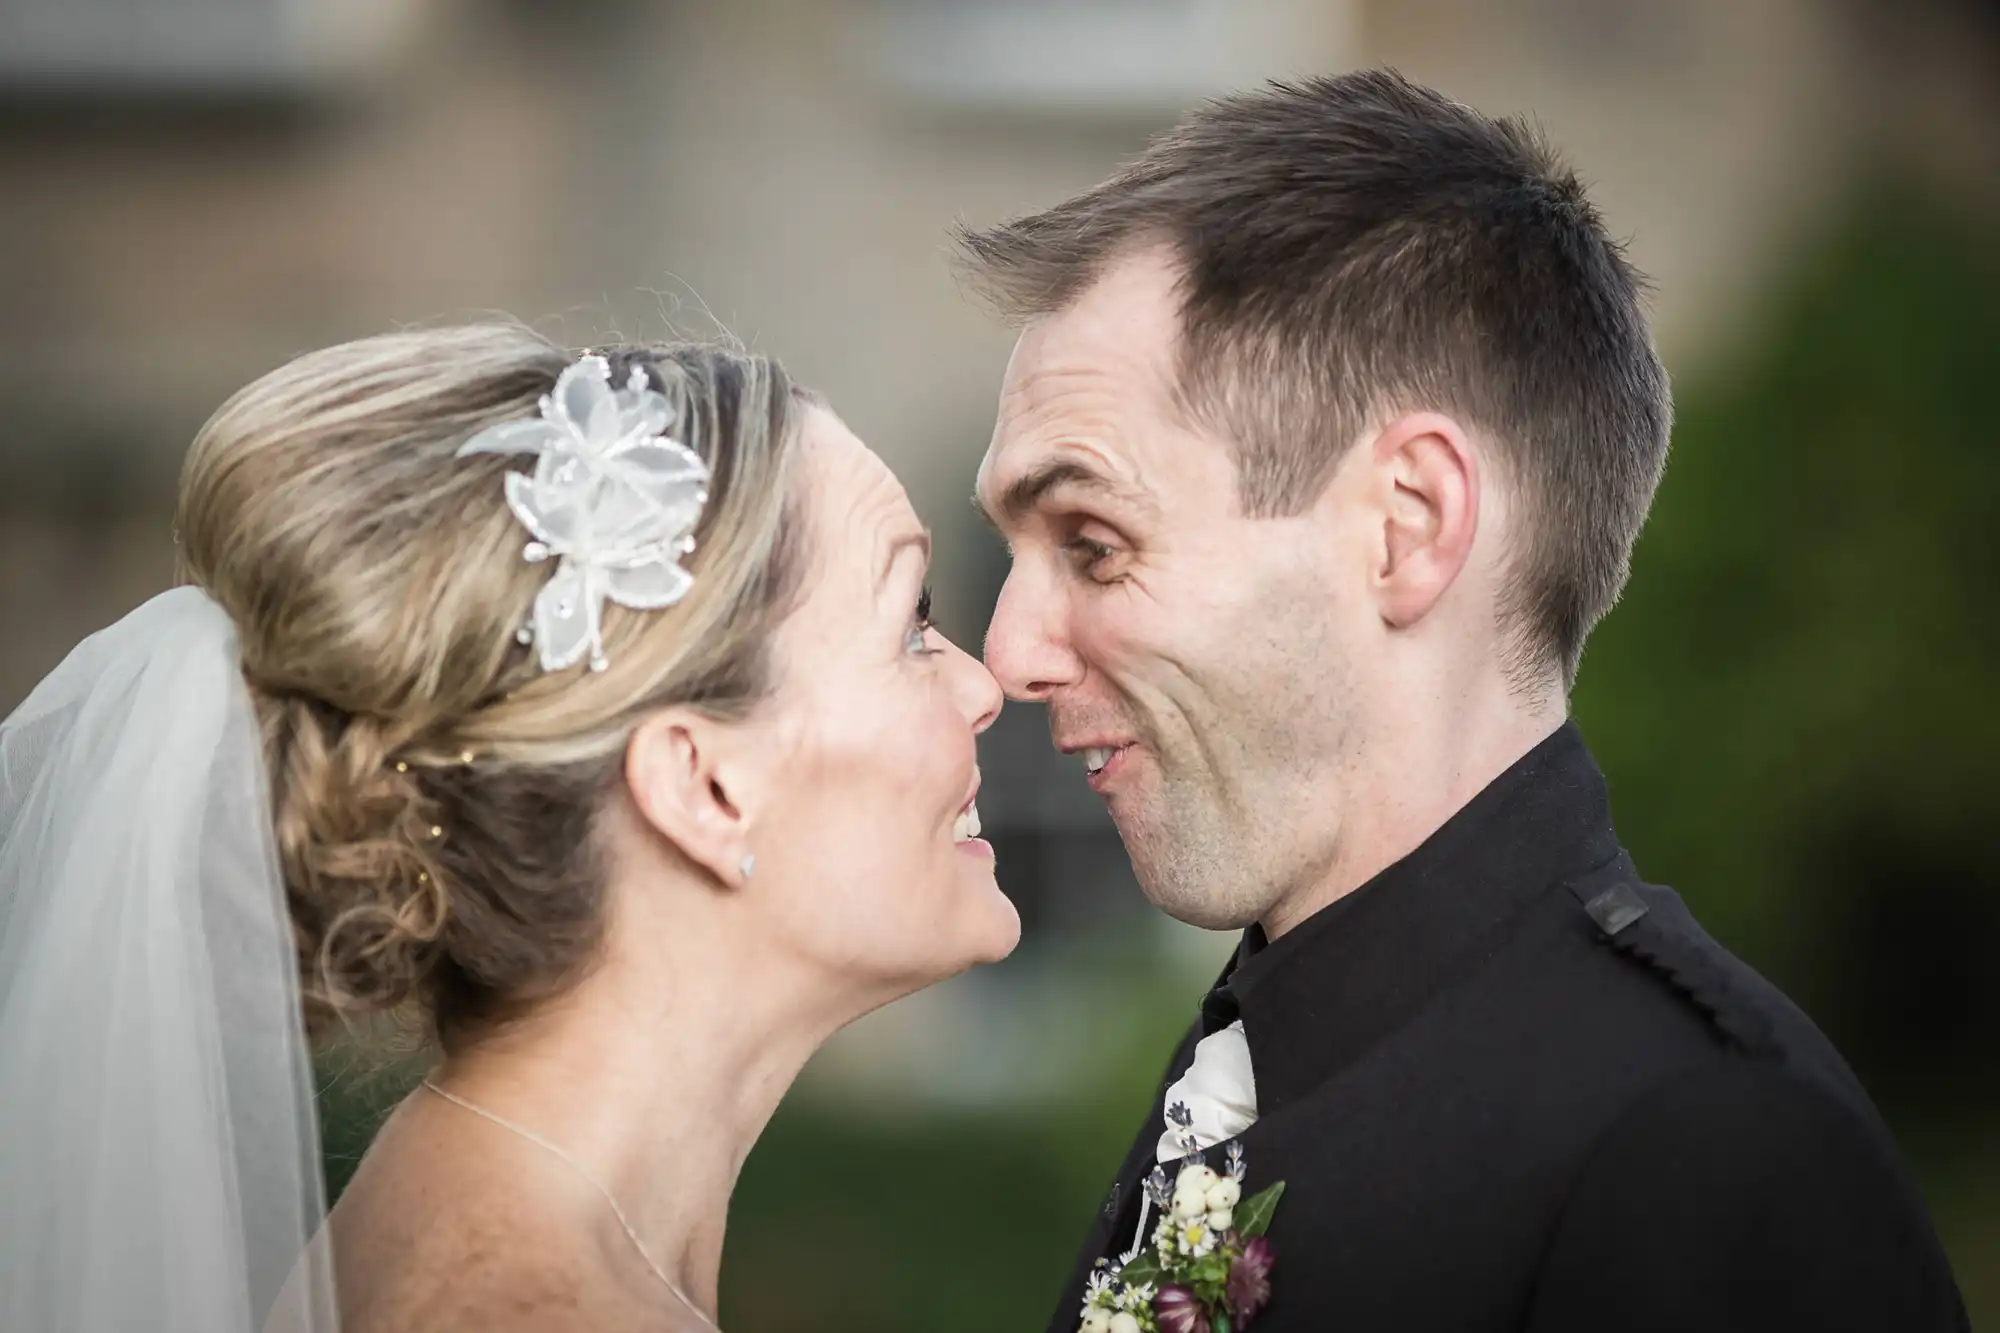 A bride and groom lovingly touch noses and smile at each other, dressed in wedding attire, with a soft-focus background.